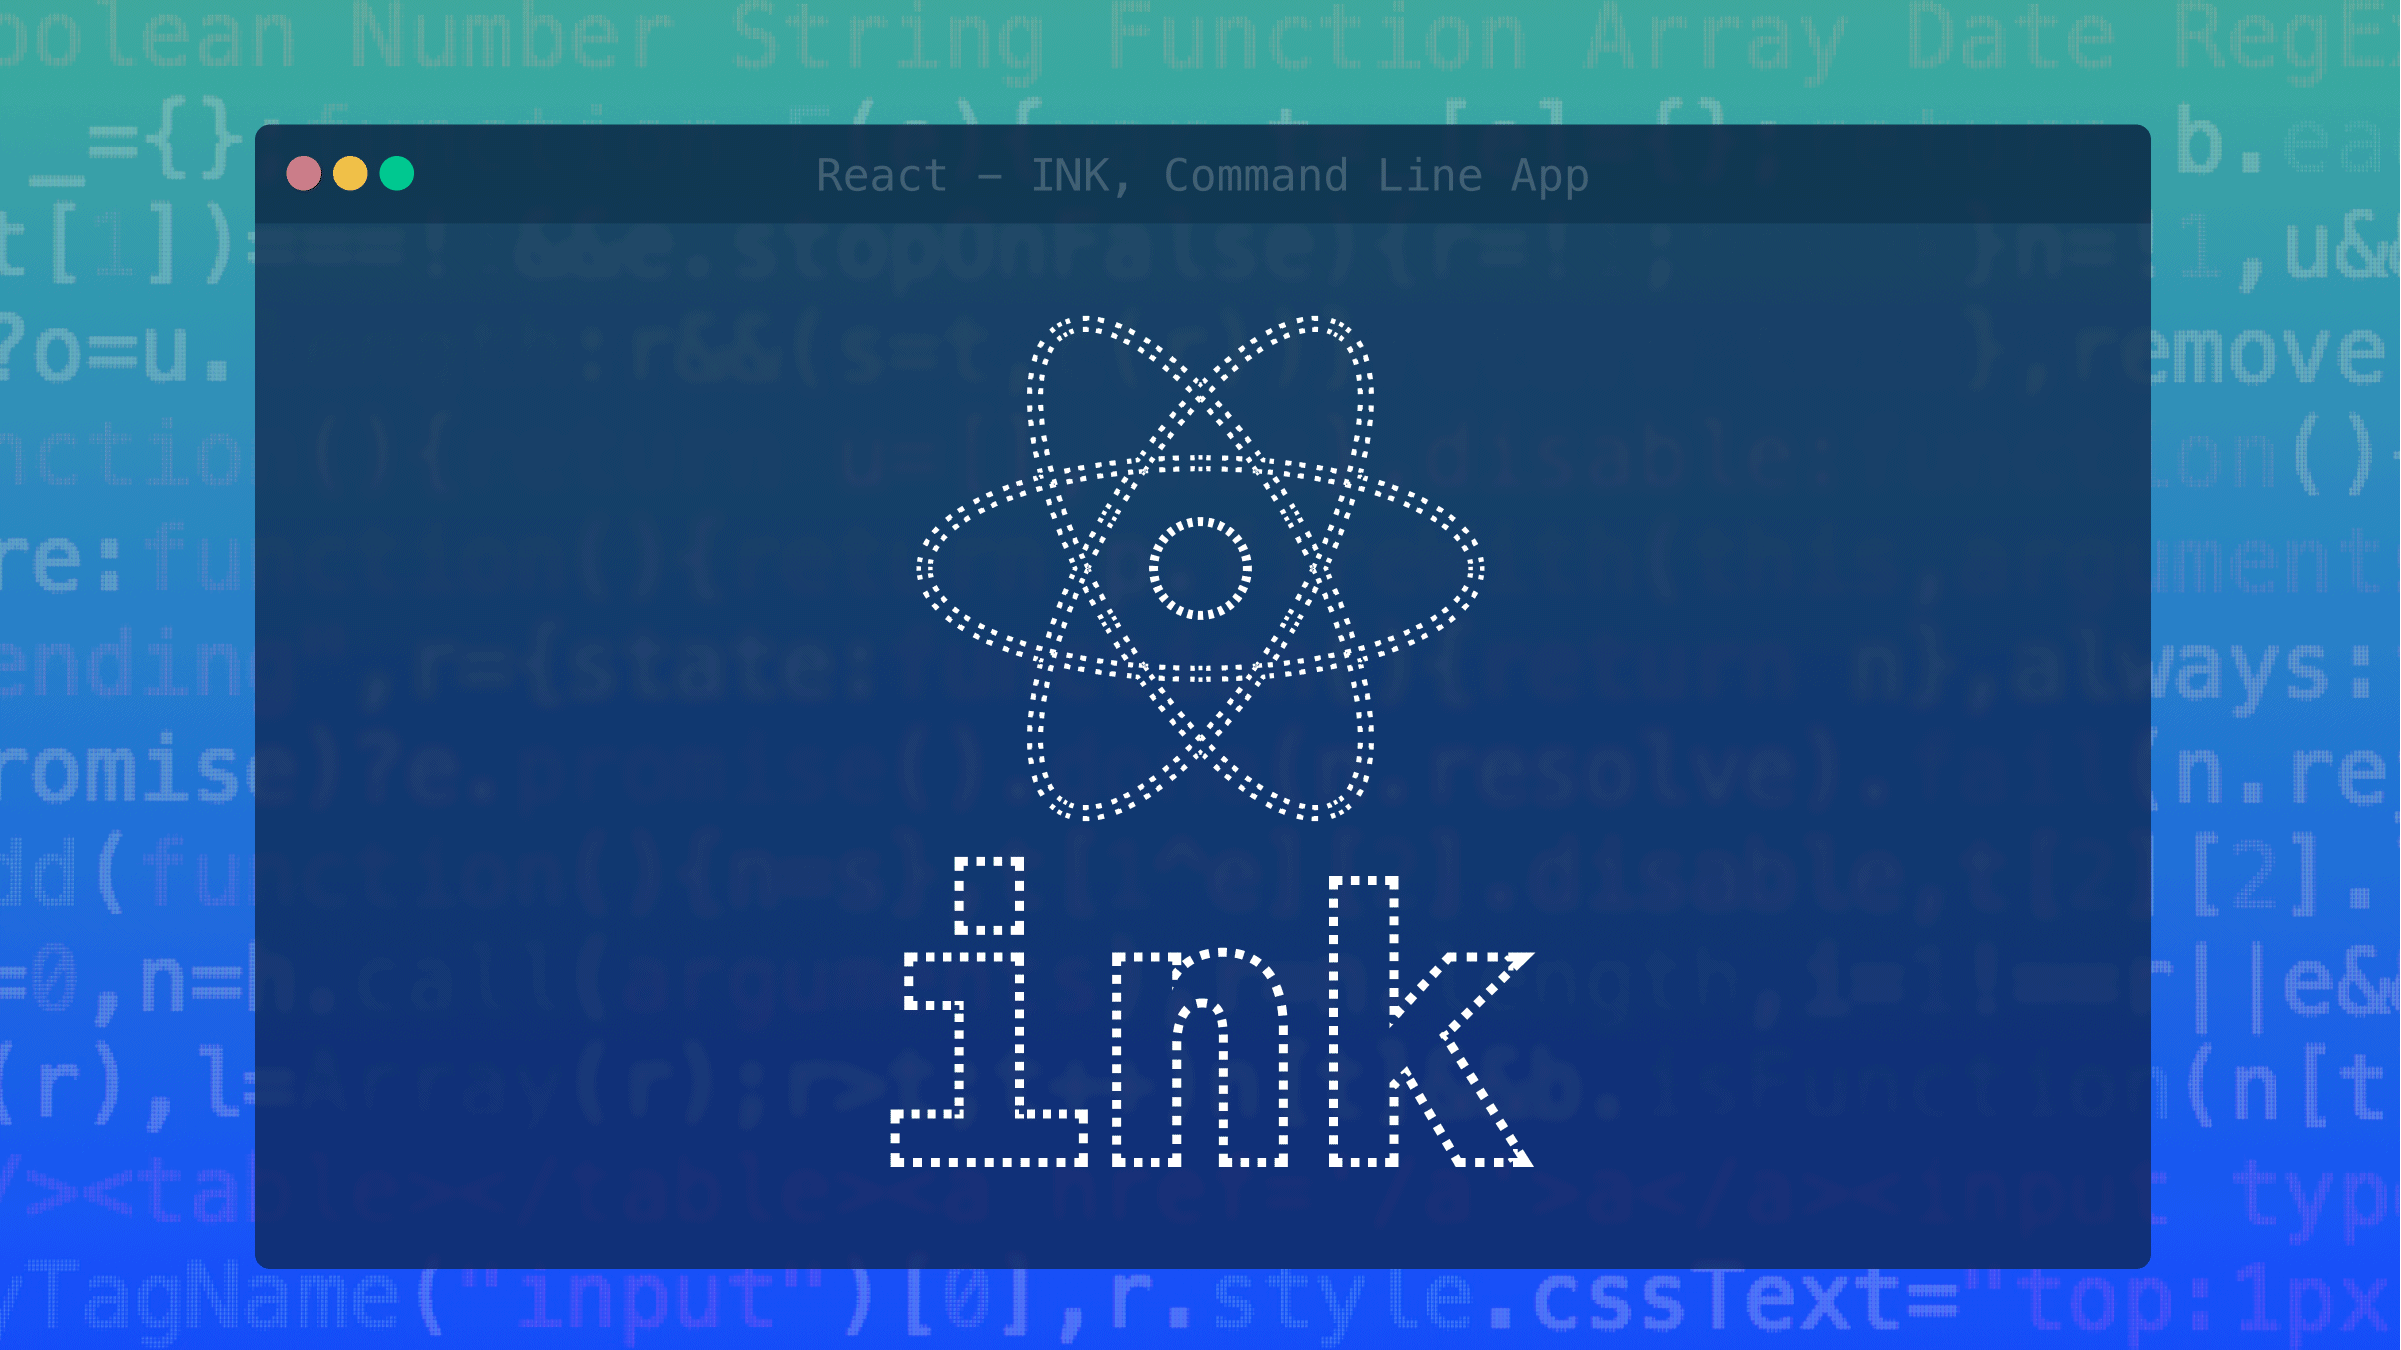 Building Command-Line Apps Using React Ink